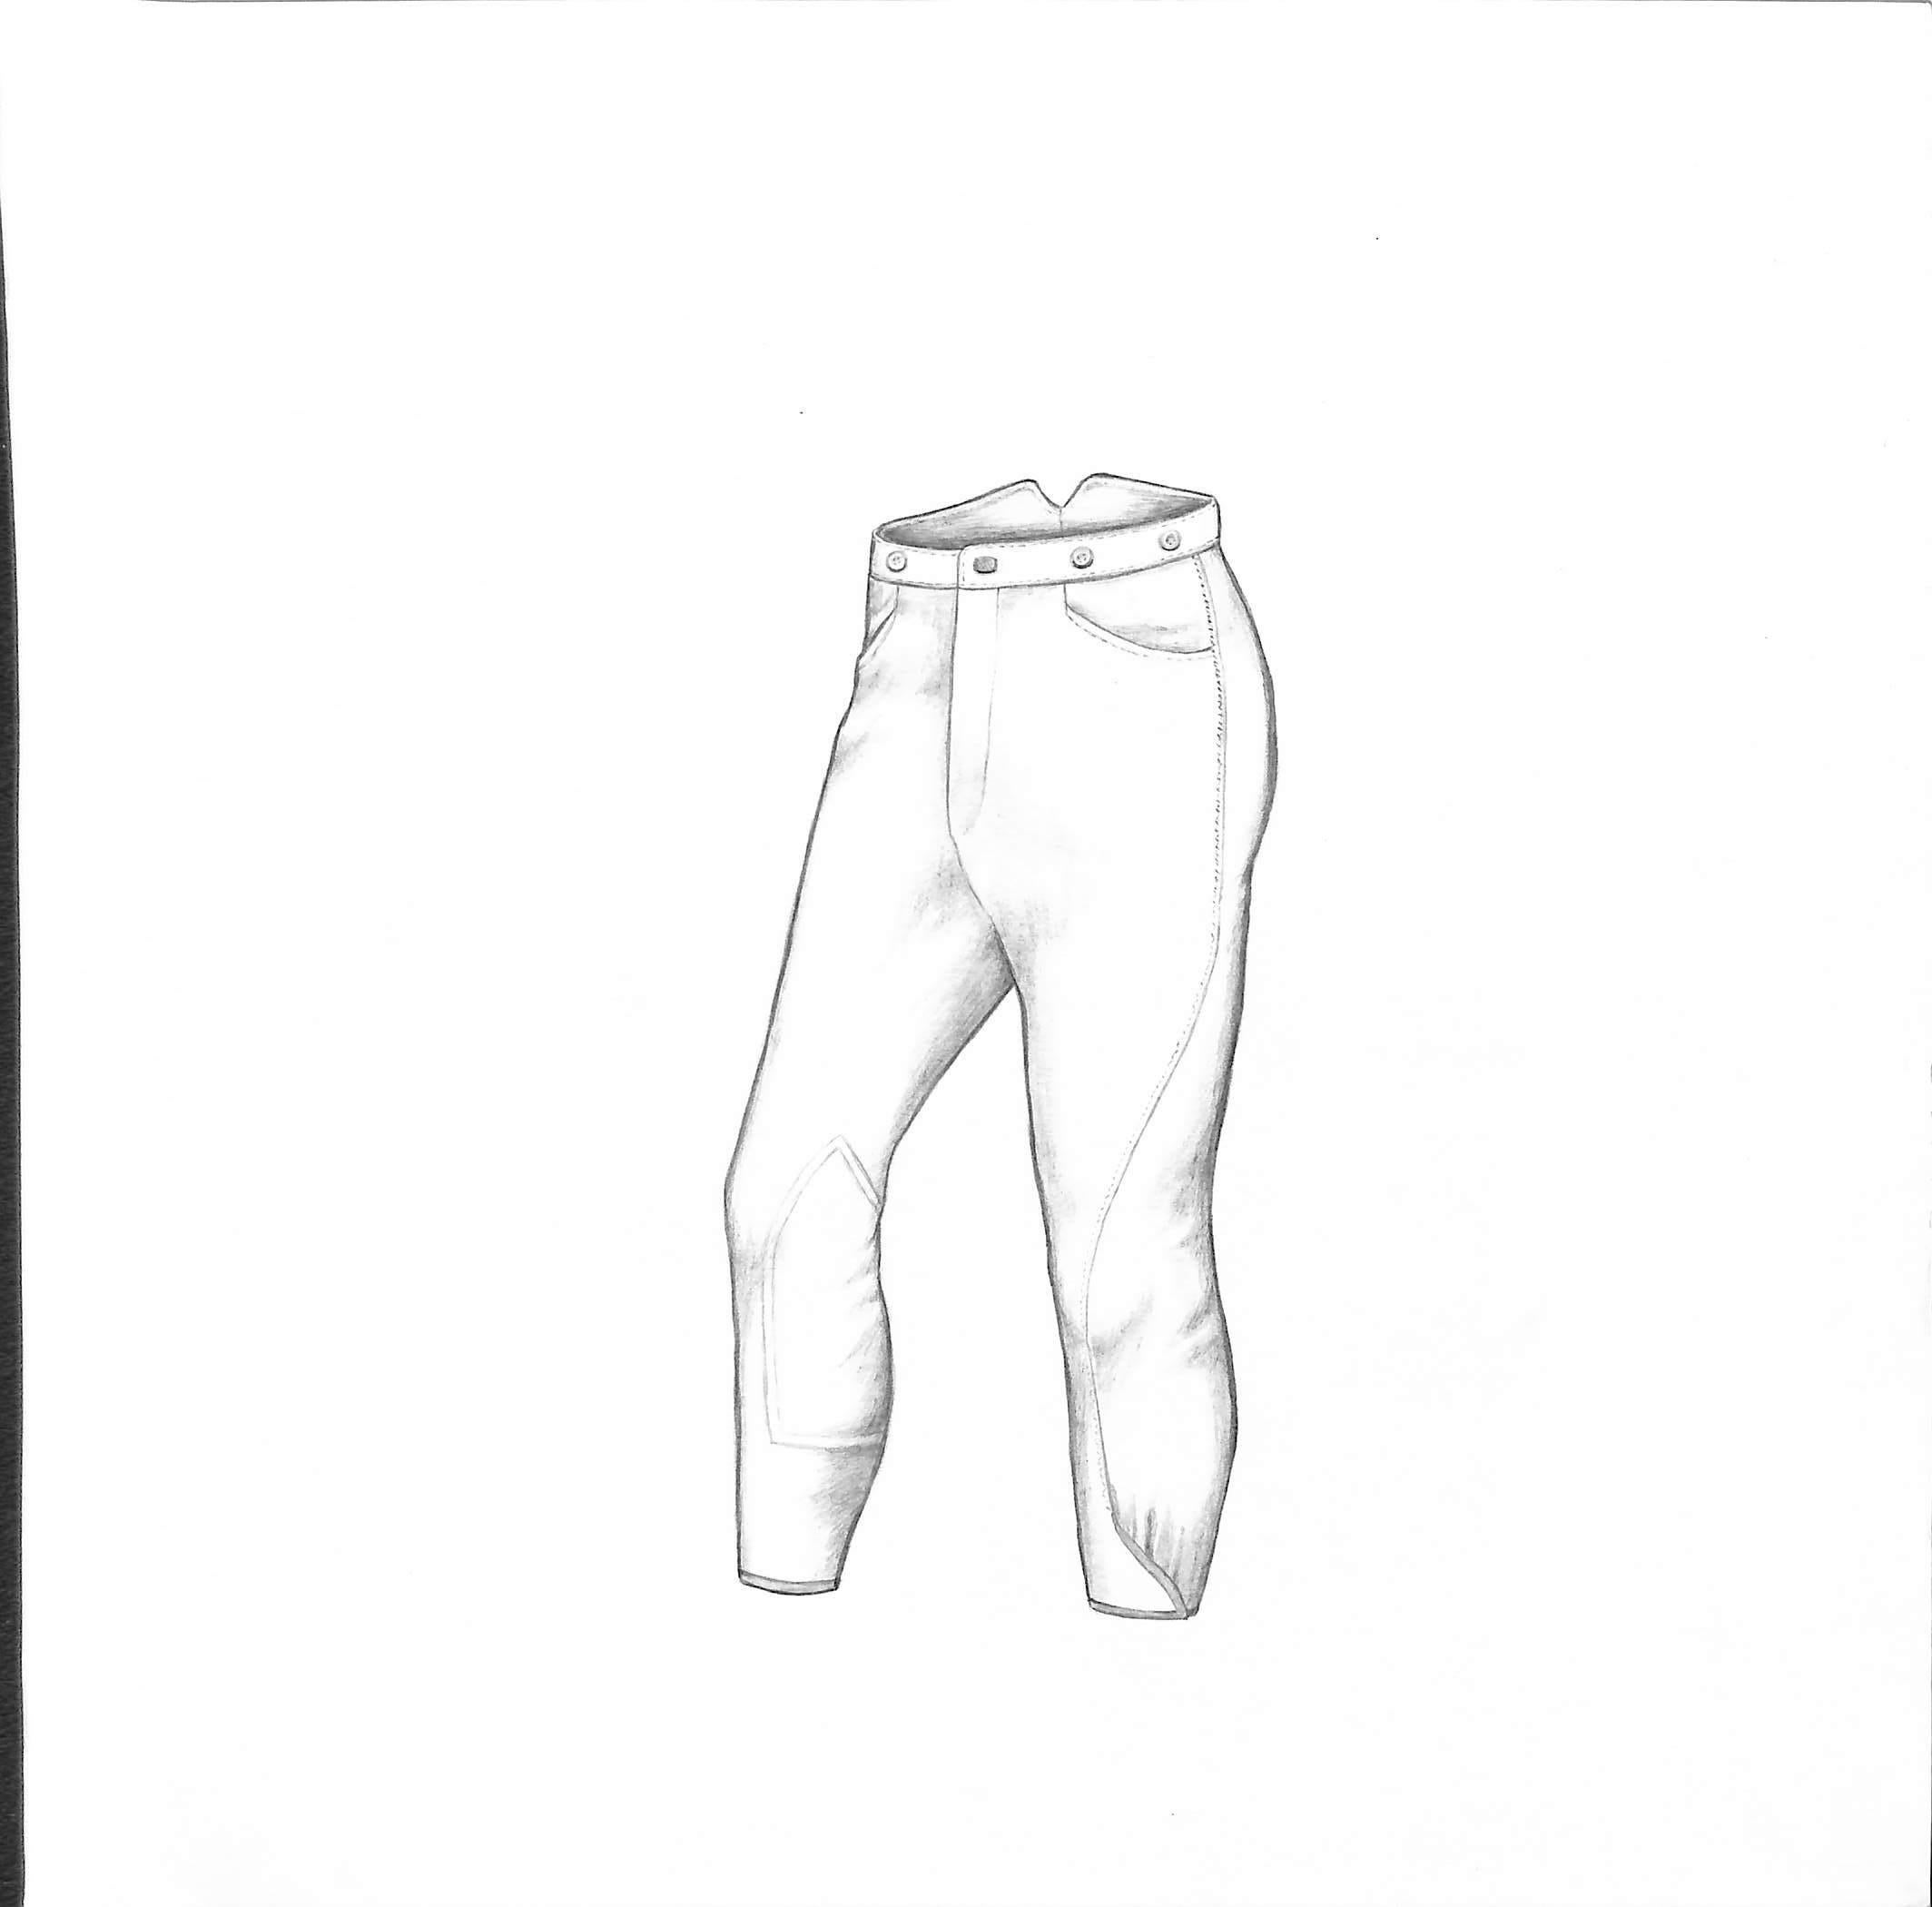 Gents Fleece Lined Hunt Britches Graphite Drawing - Art by Unknown